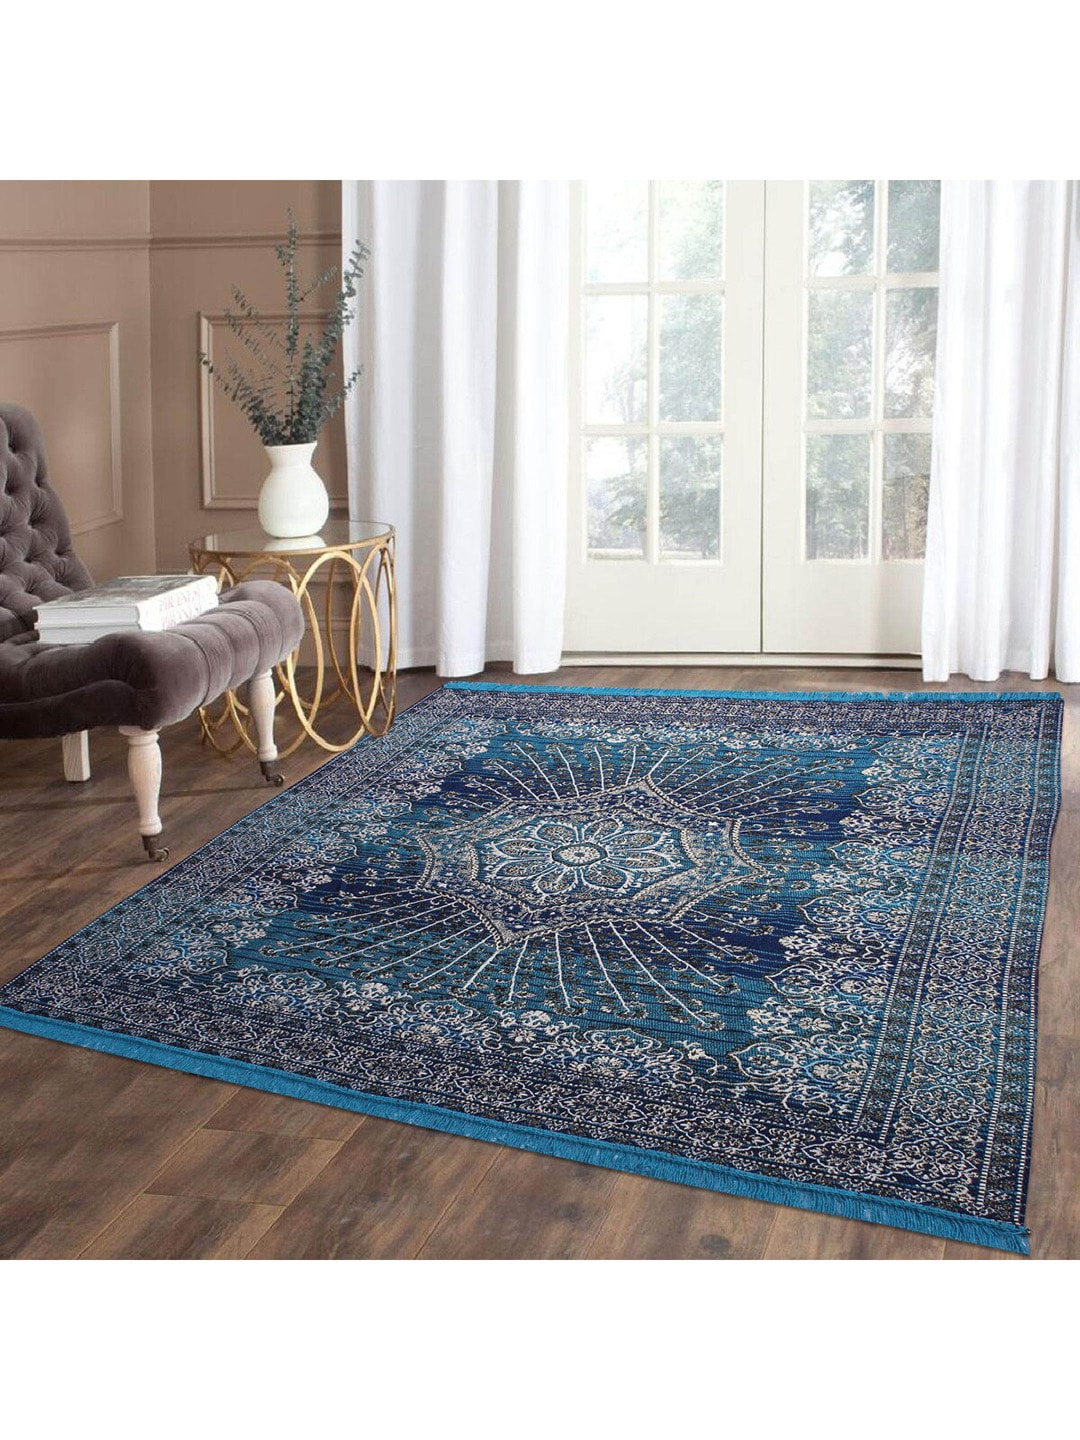 Home Centre Teal Blue & White Ethnic Motifs Corsica Classic Textured Jacquard Carpet Price in India